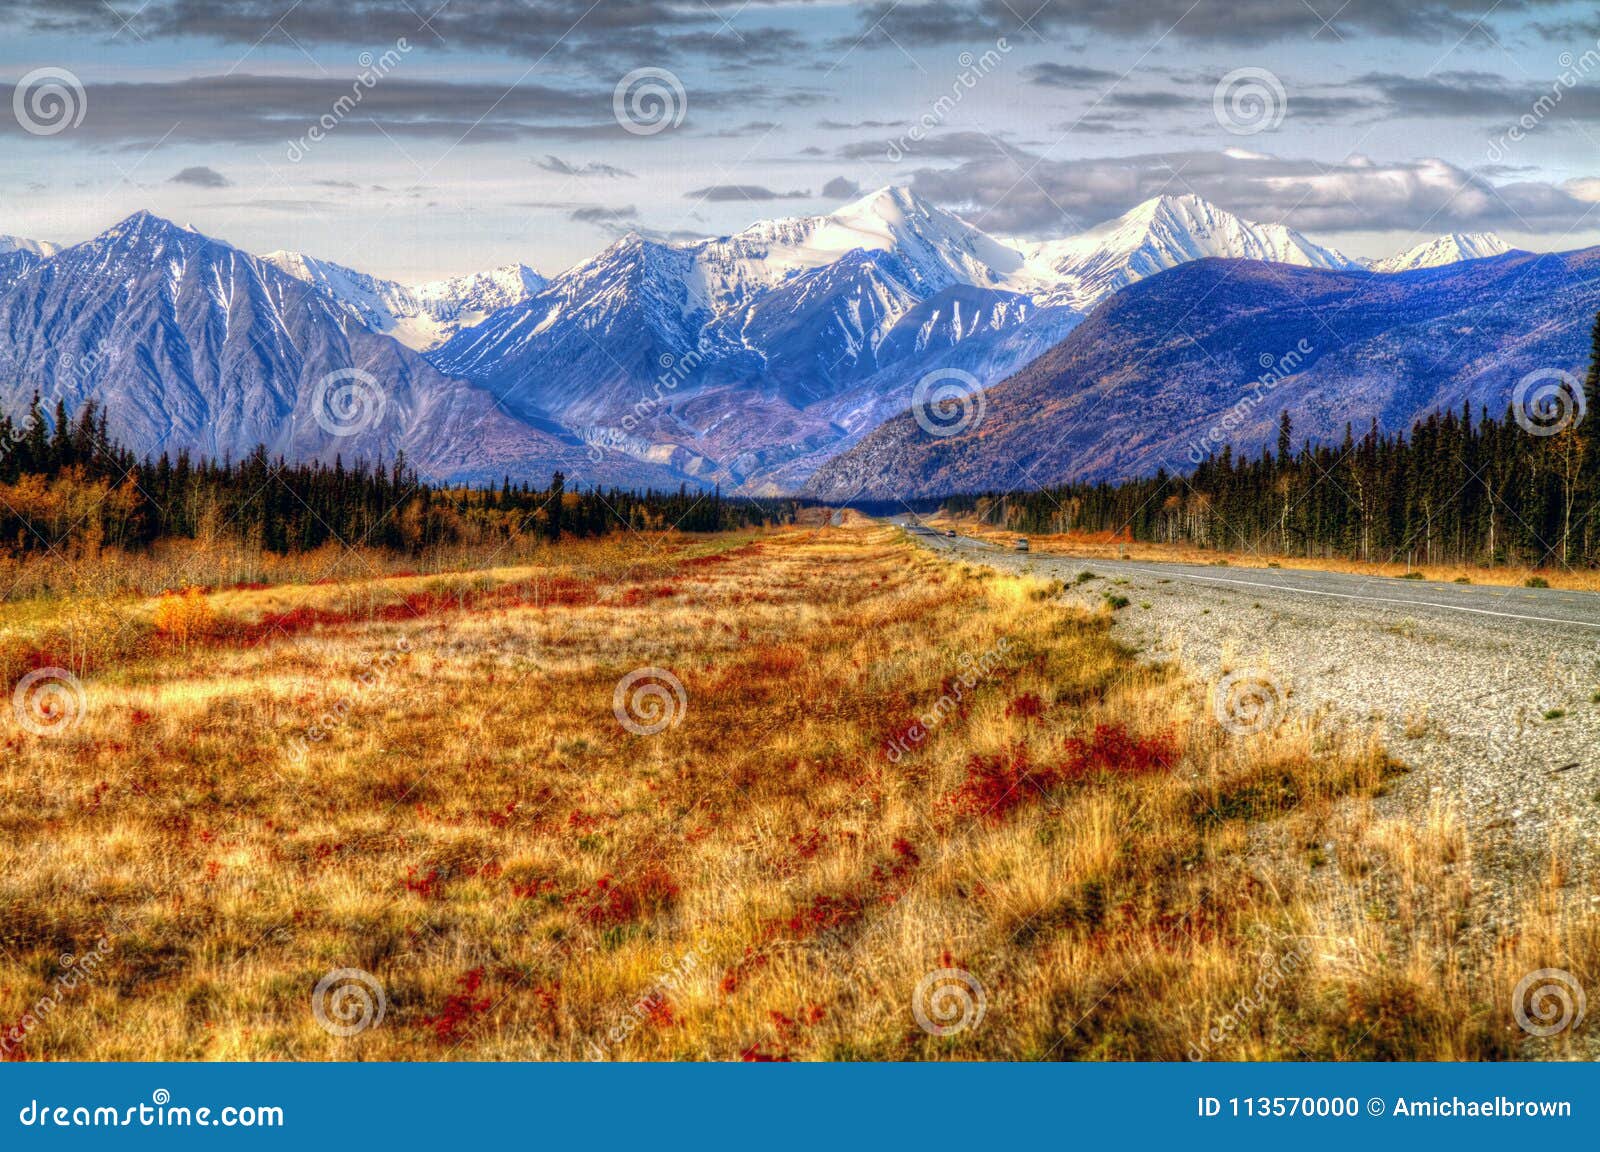 valley and mountainside views, yukon territories, canada